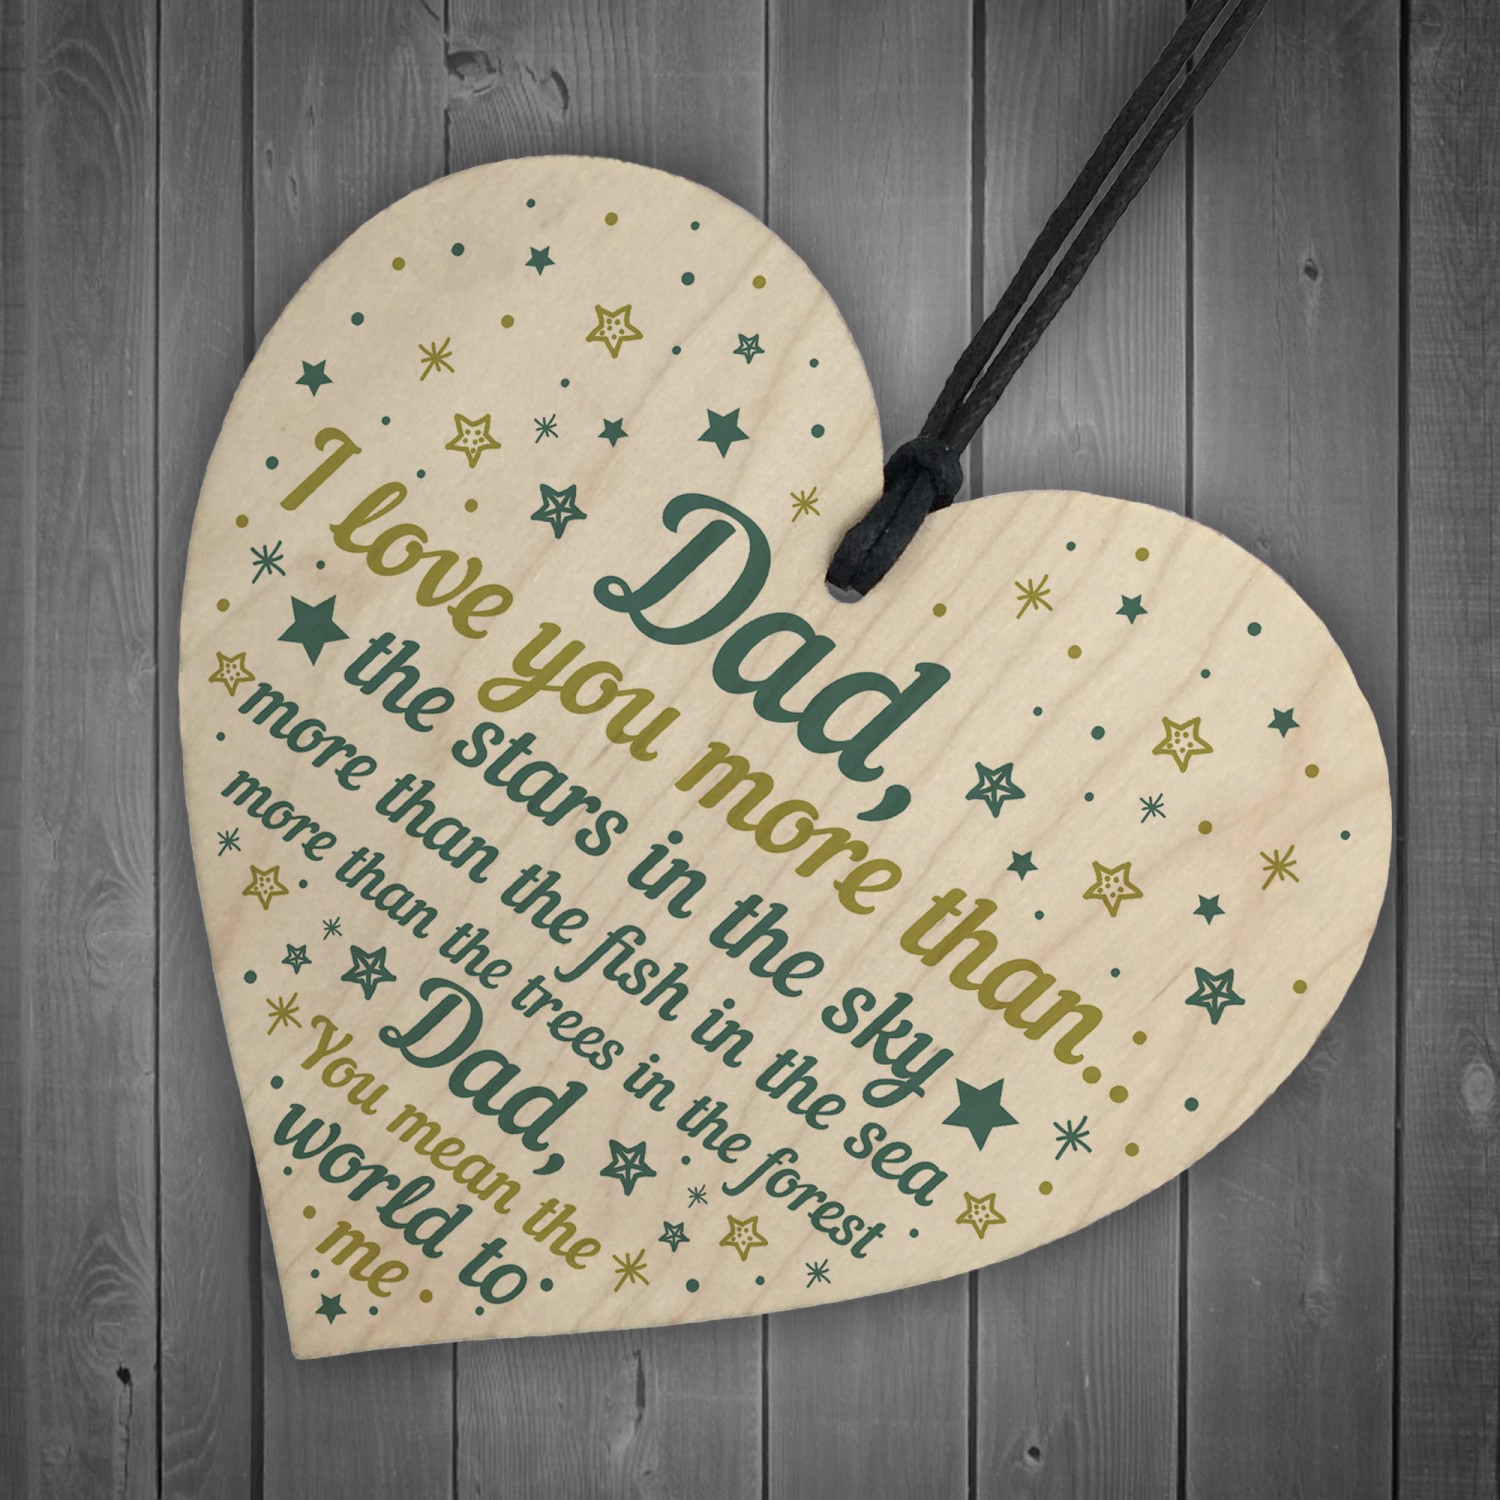 I Love You More Than All The Stars In The Sky Fathers Day Plaque For Dad Daddy Home Decor Plaques Signs Onehostingcenter Home Garden